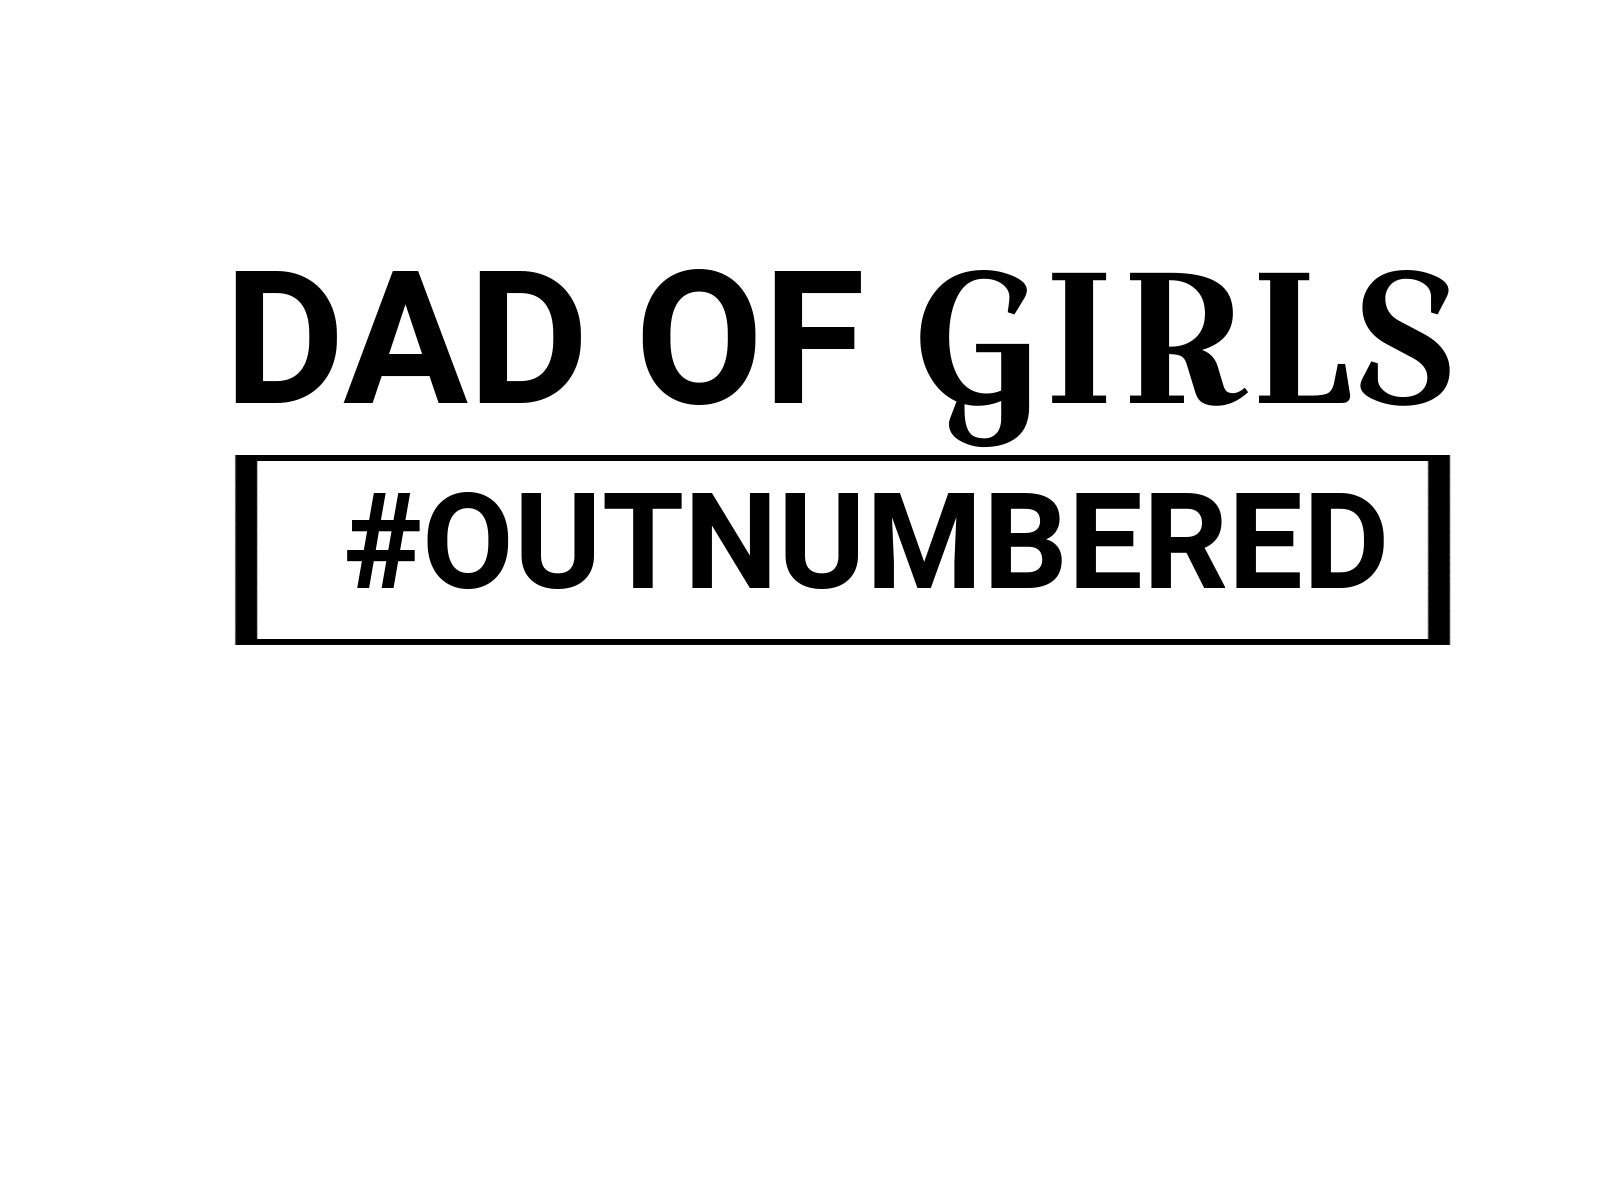 Dad of Girls #outnumbered